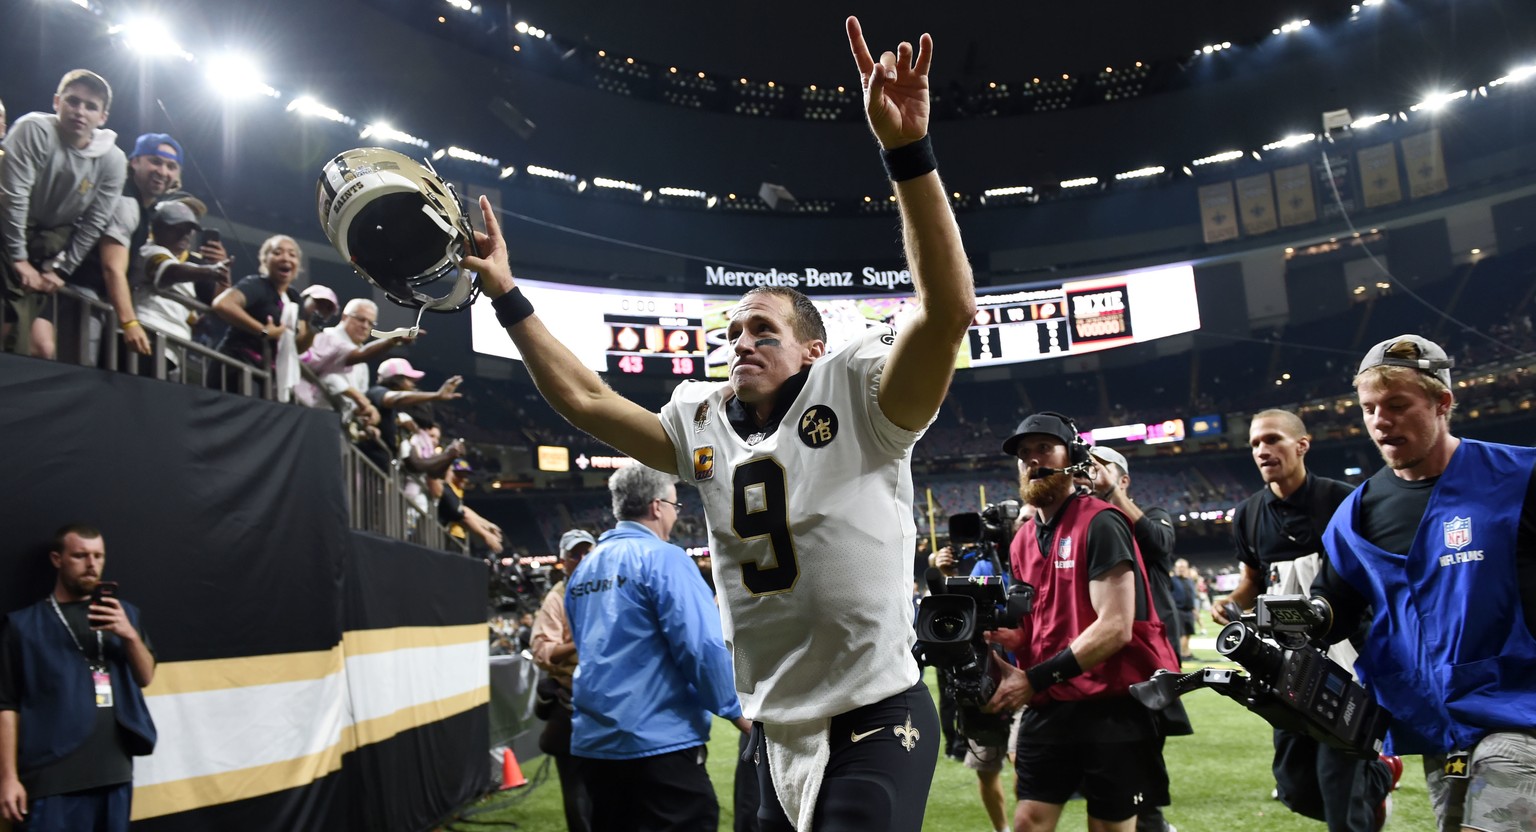 New Orleans Saints quarterback Drew Brees (9) acknowledges the crowd as he runs off the field after an NFL football game against the Washington Redskins in New Orleans, Monday, Oct. 8, 2018. Brees bro ...